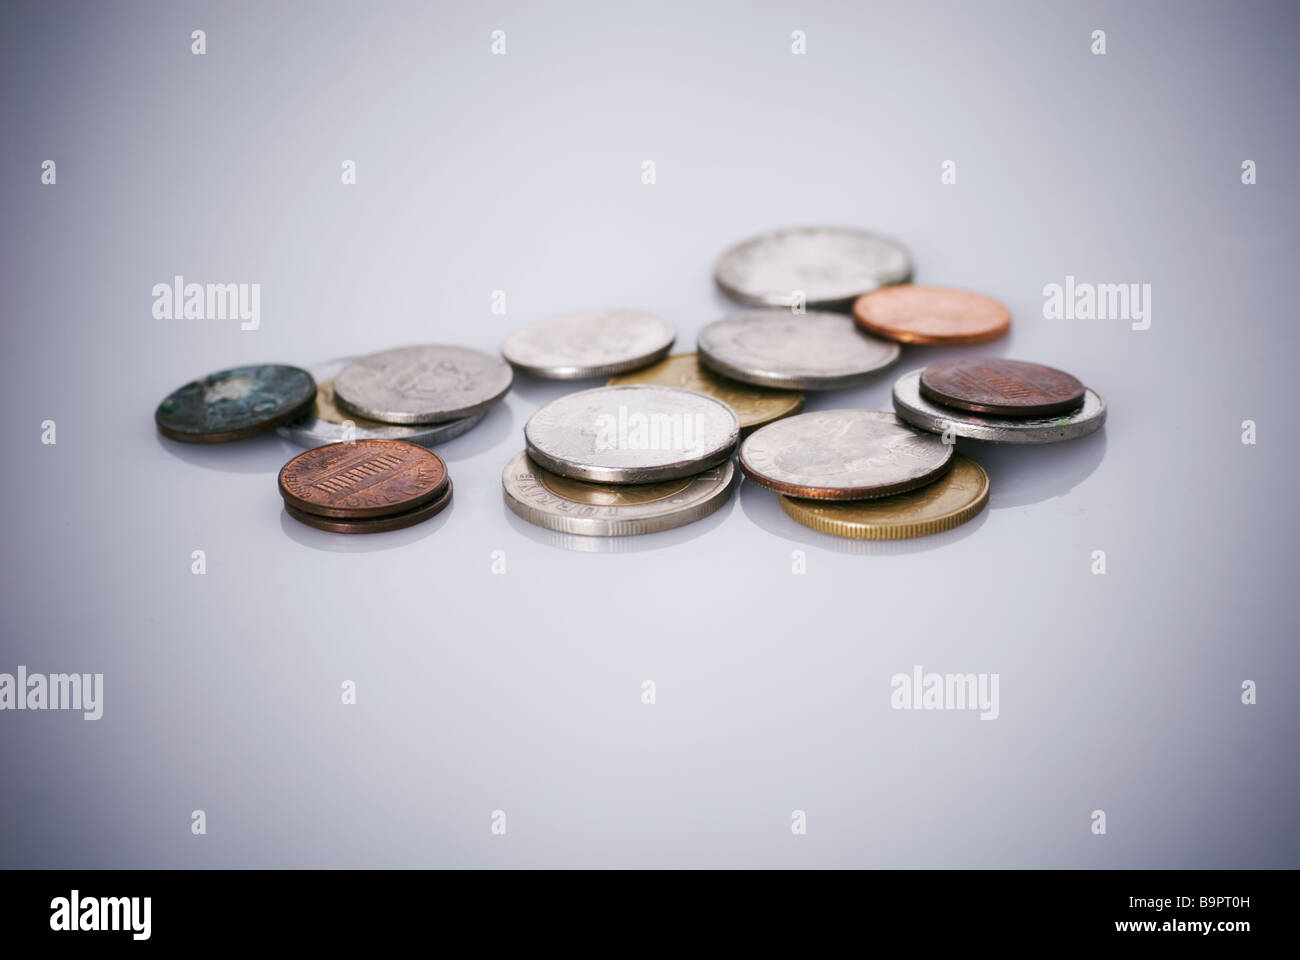 Collection of different money coins on a white background Stock Photo